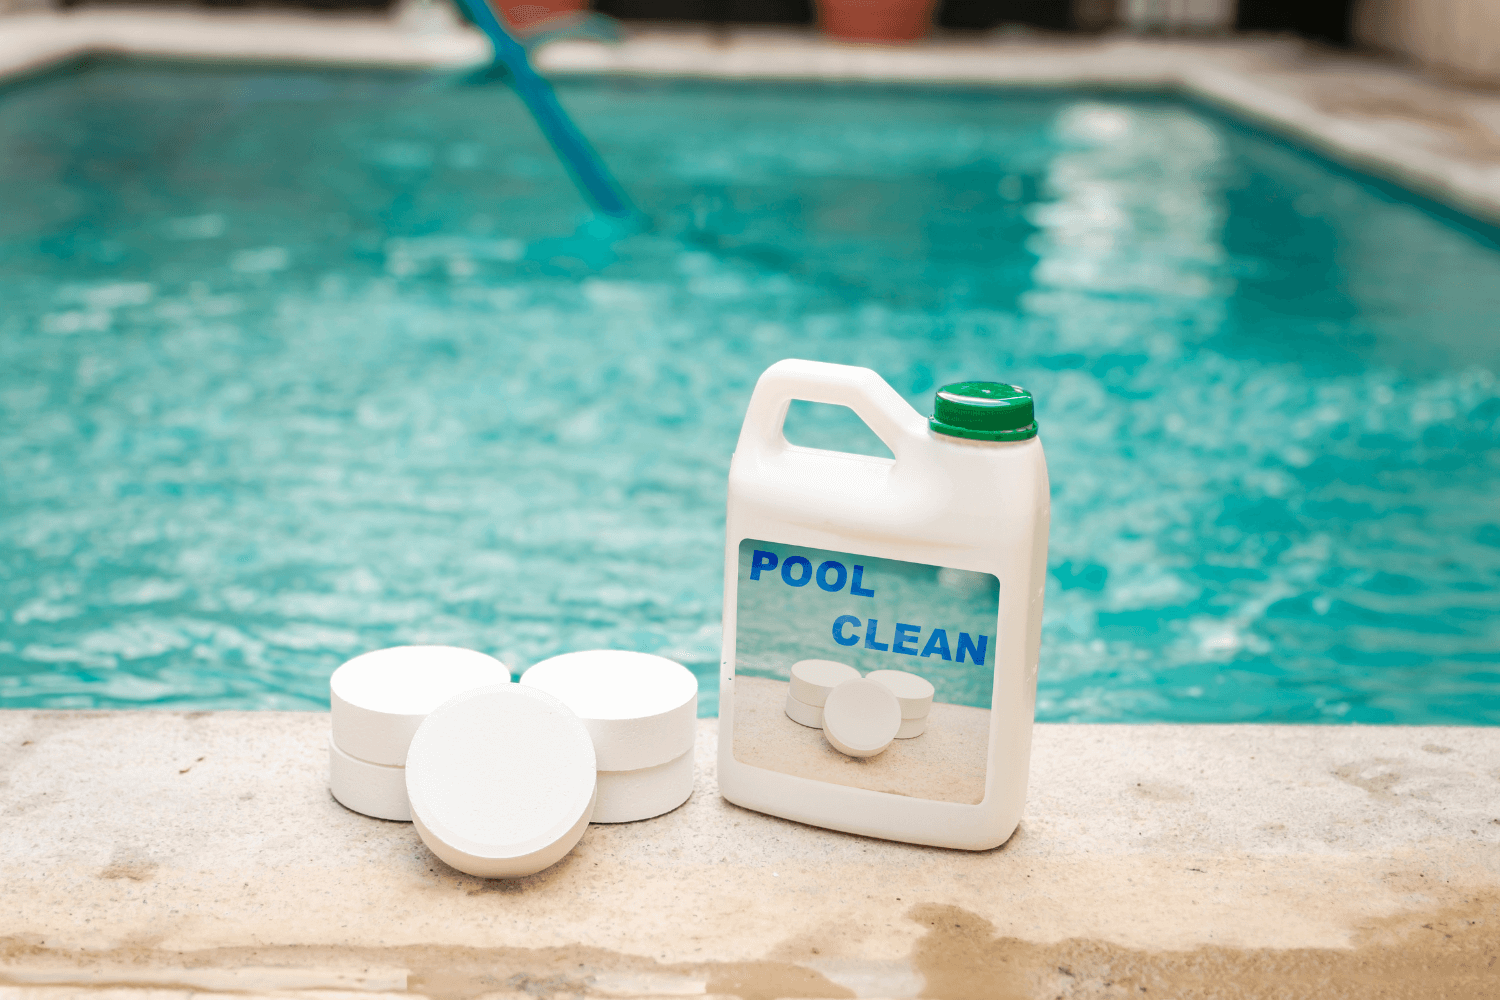 Chlorine tablets sitting next to a swimming pool